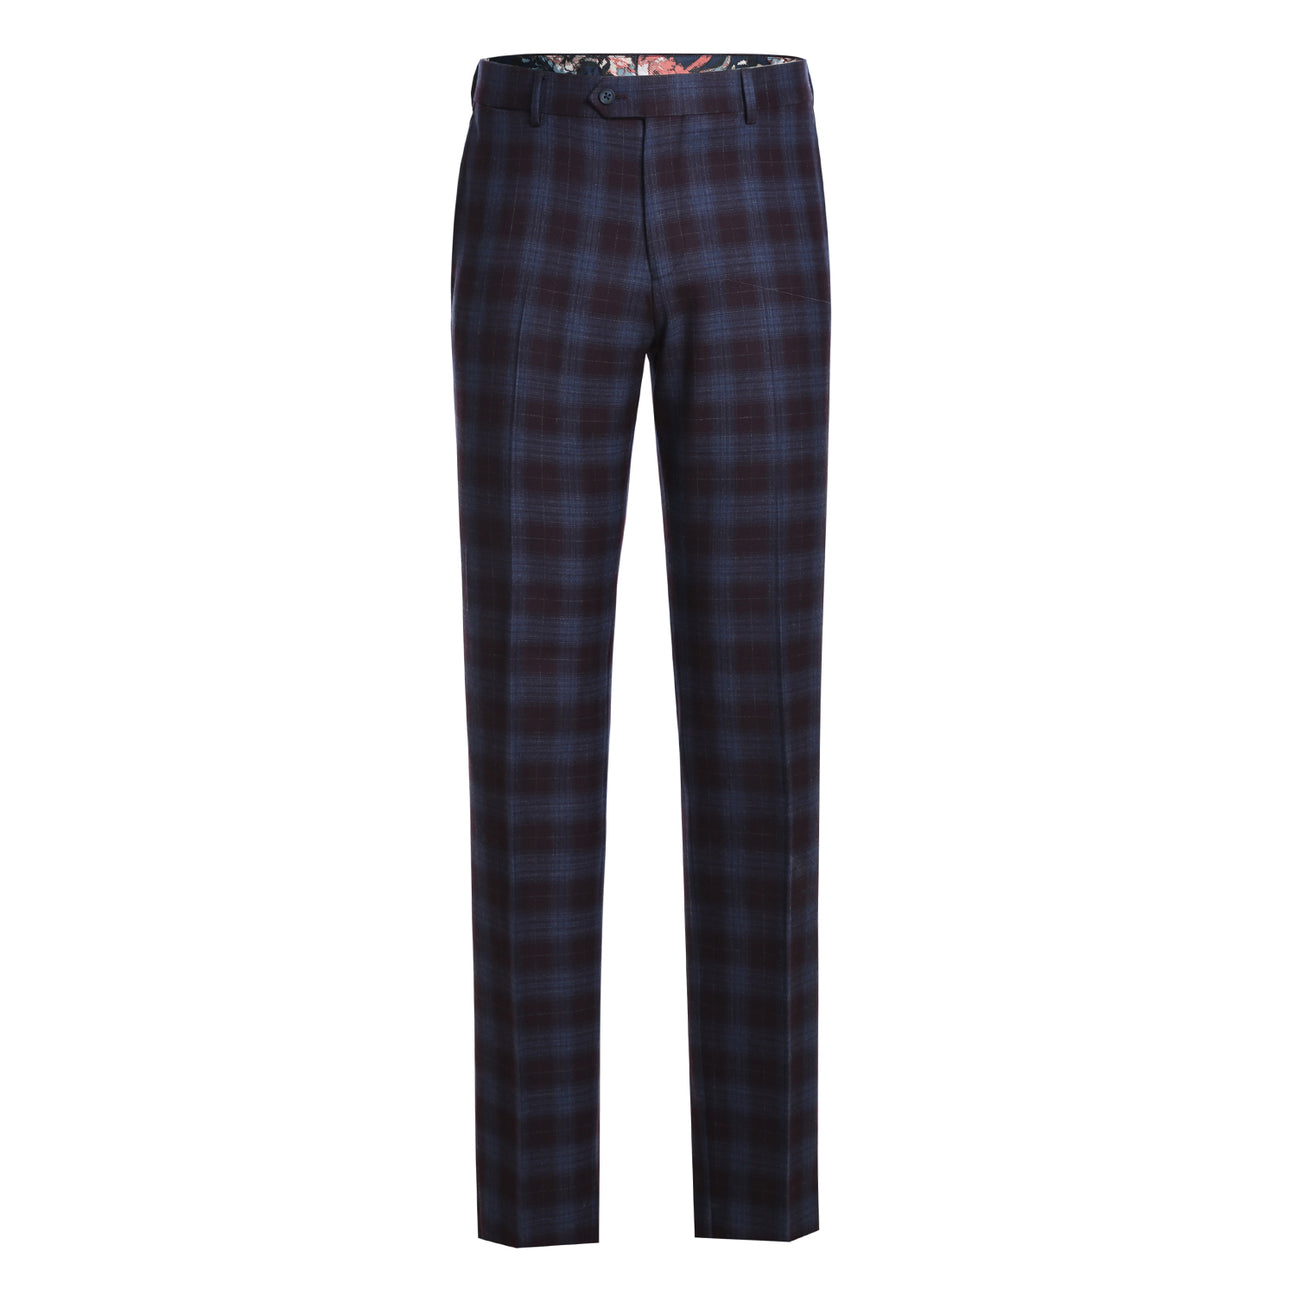 ENGLISH LAUNDRY Blue with Black Check Wool Suit 62-67-750